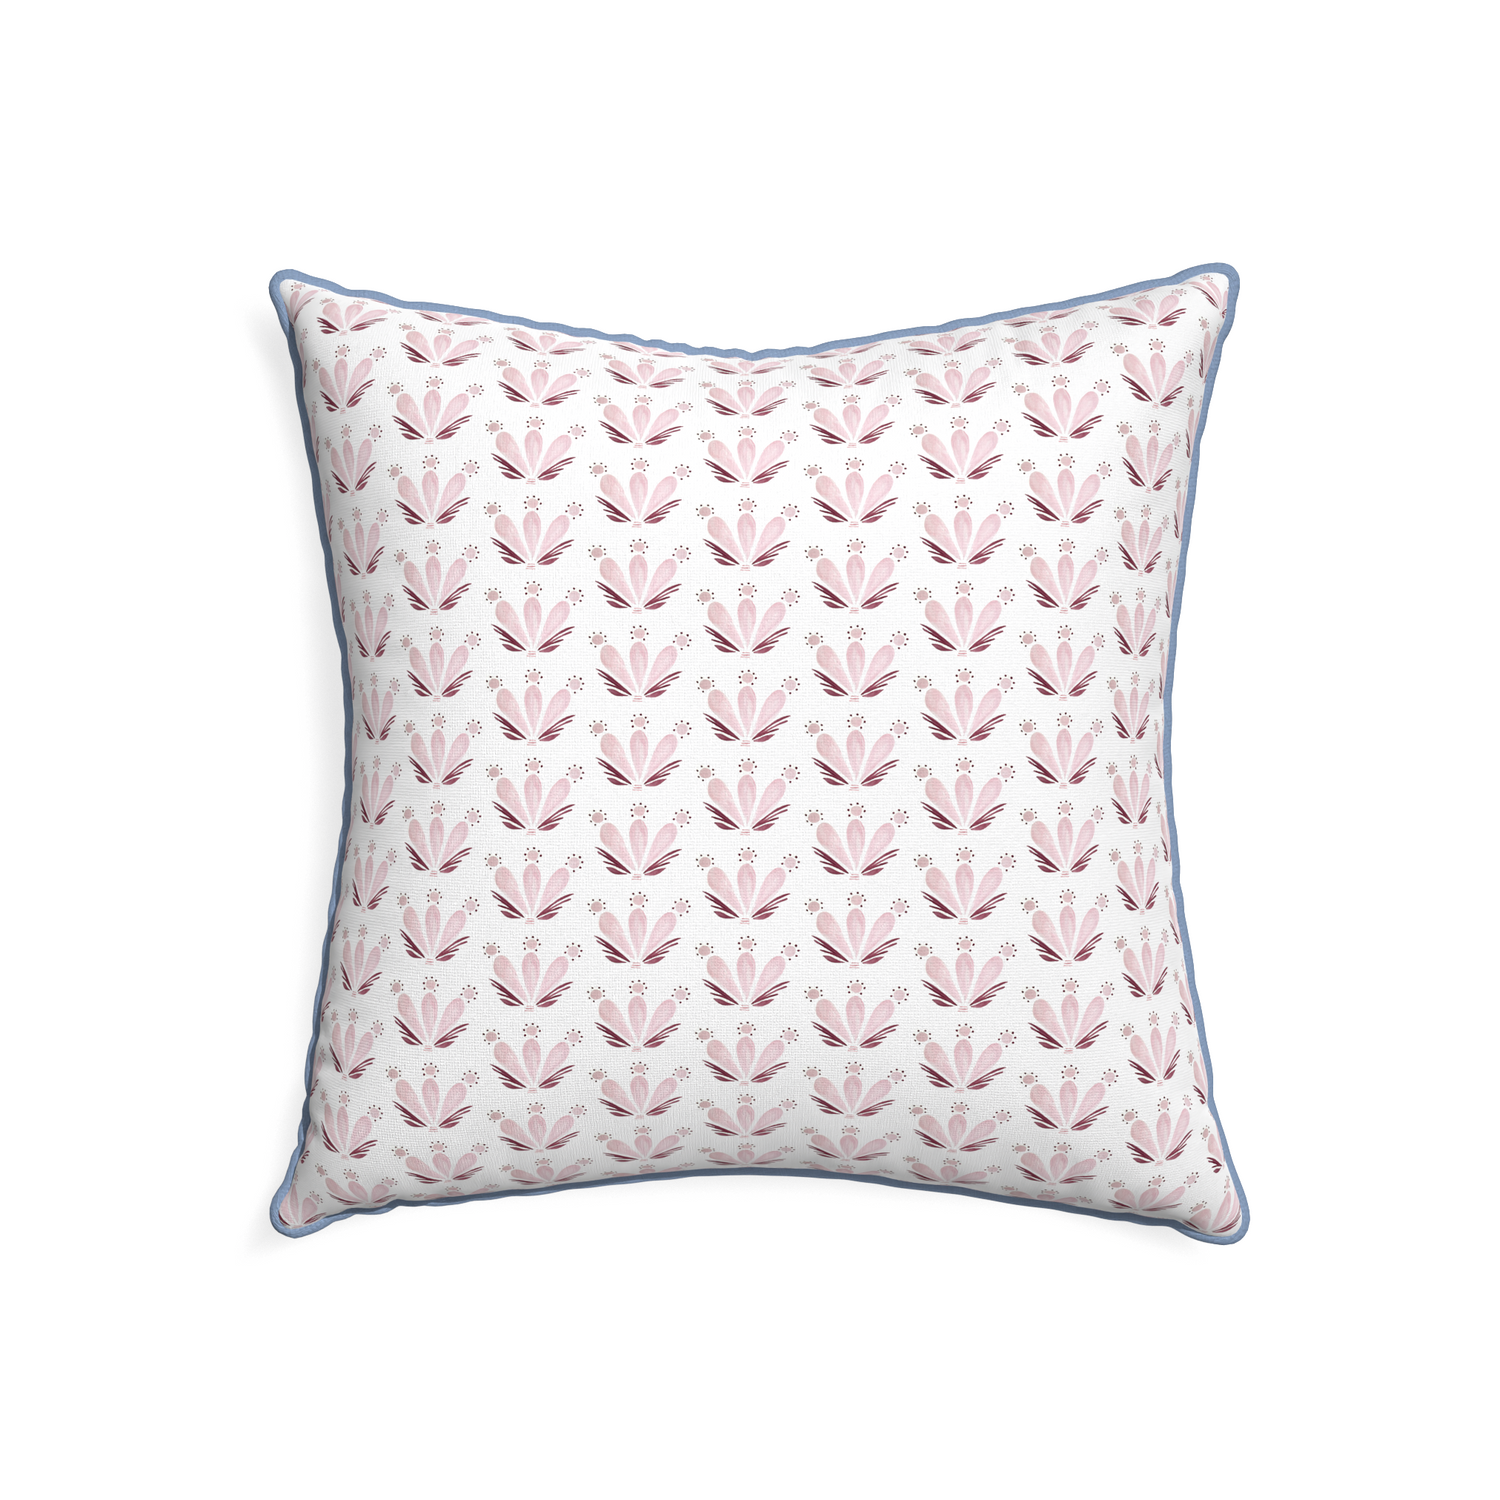 22-square serena pink custom pillow with sky piping on white background